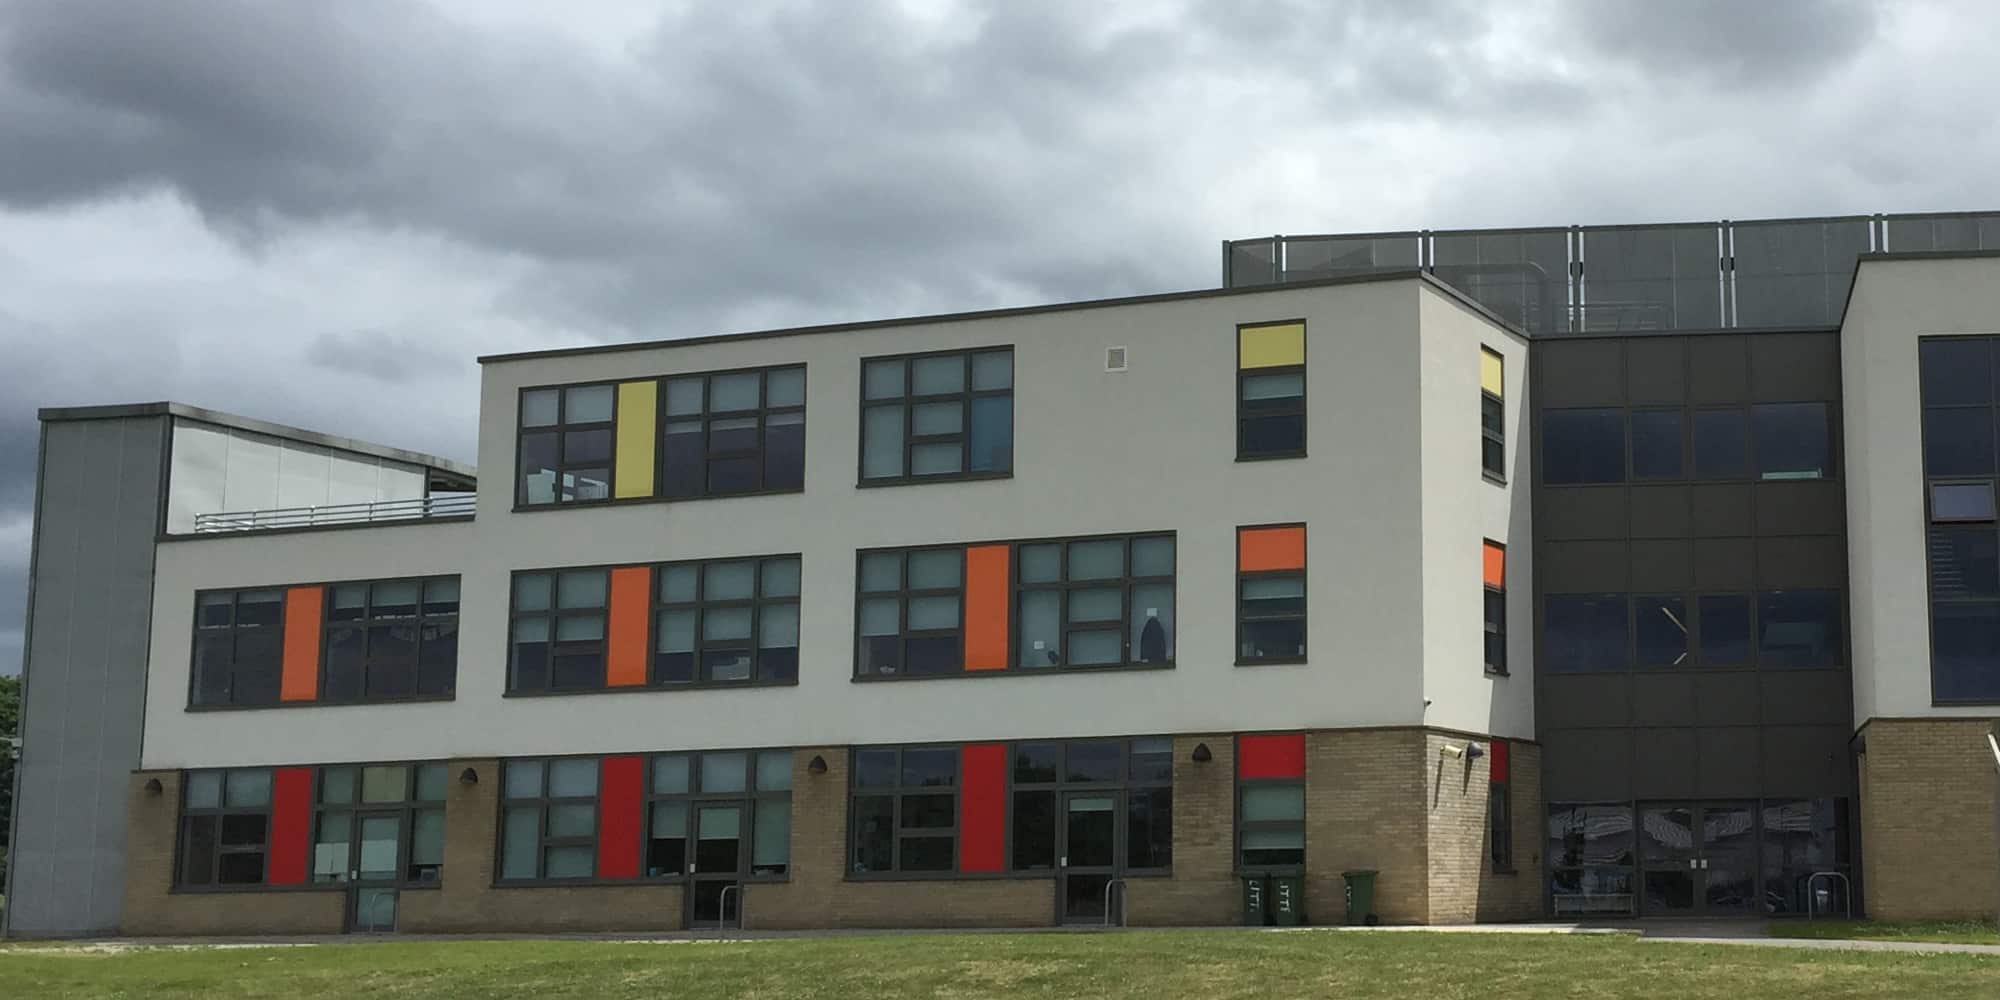 powder coating types in a school building with coloured windows and panels